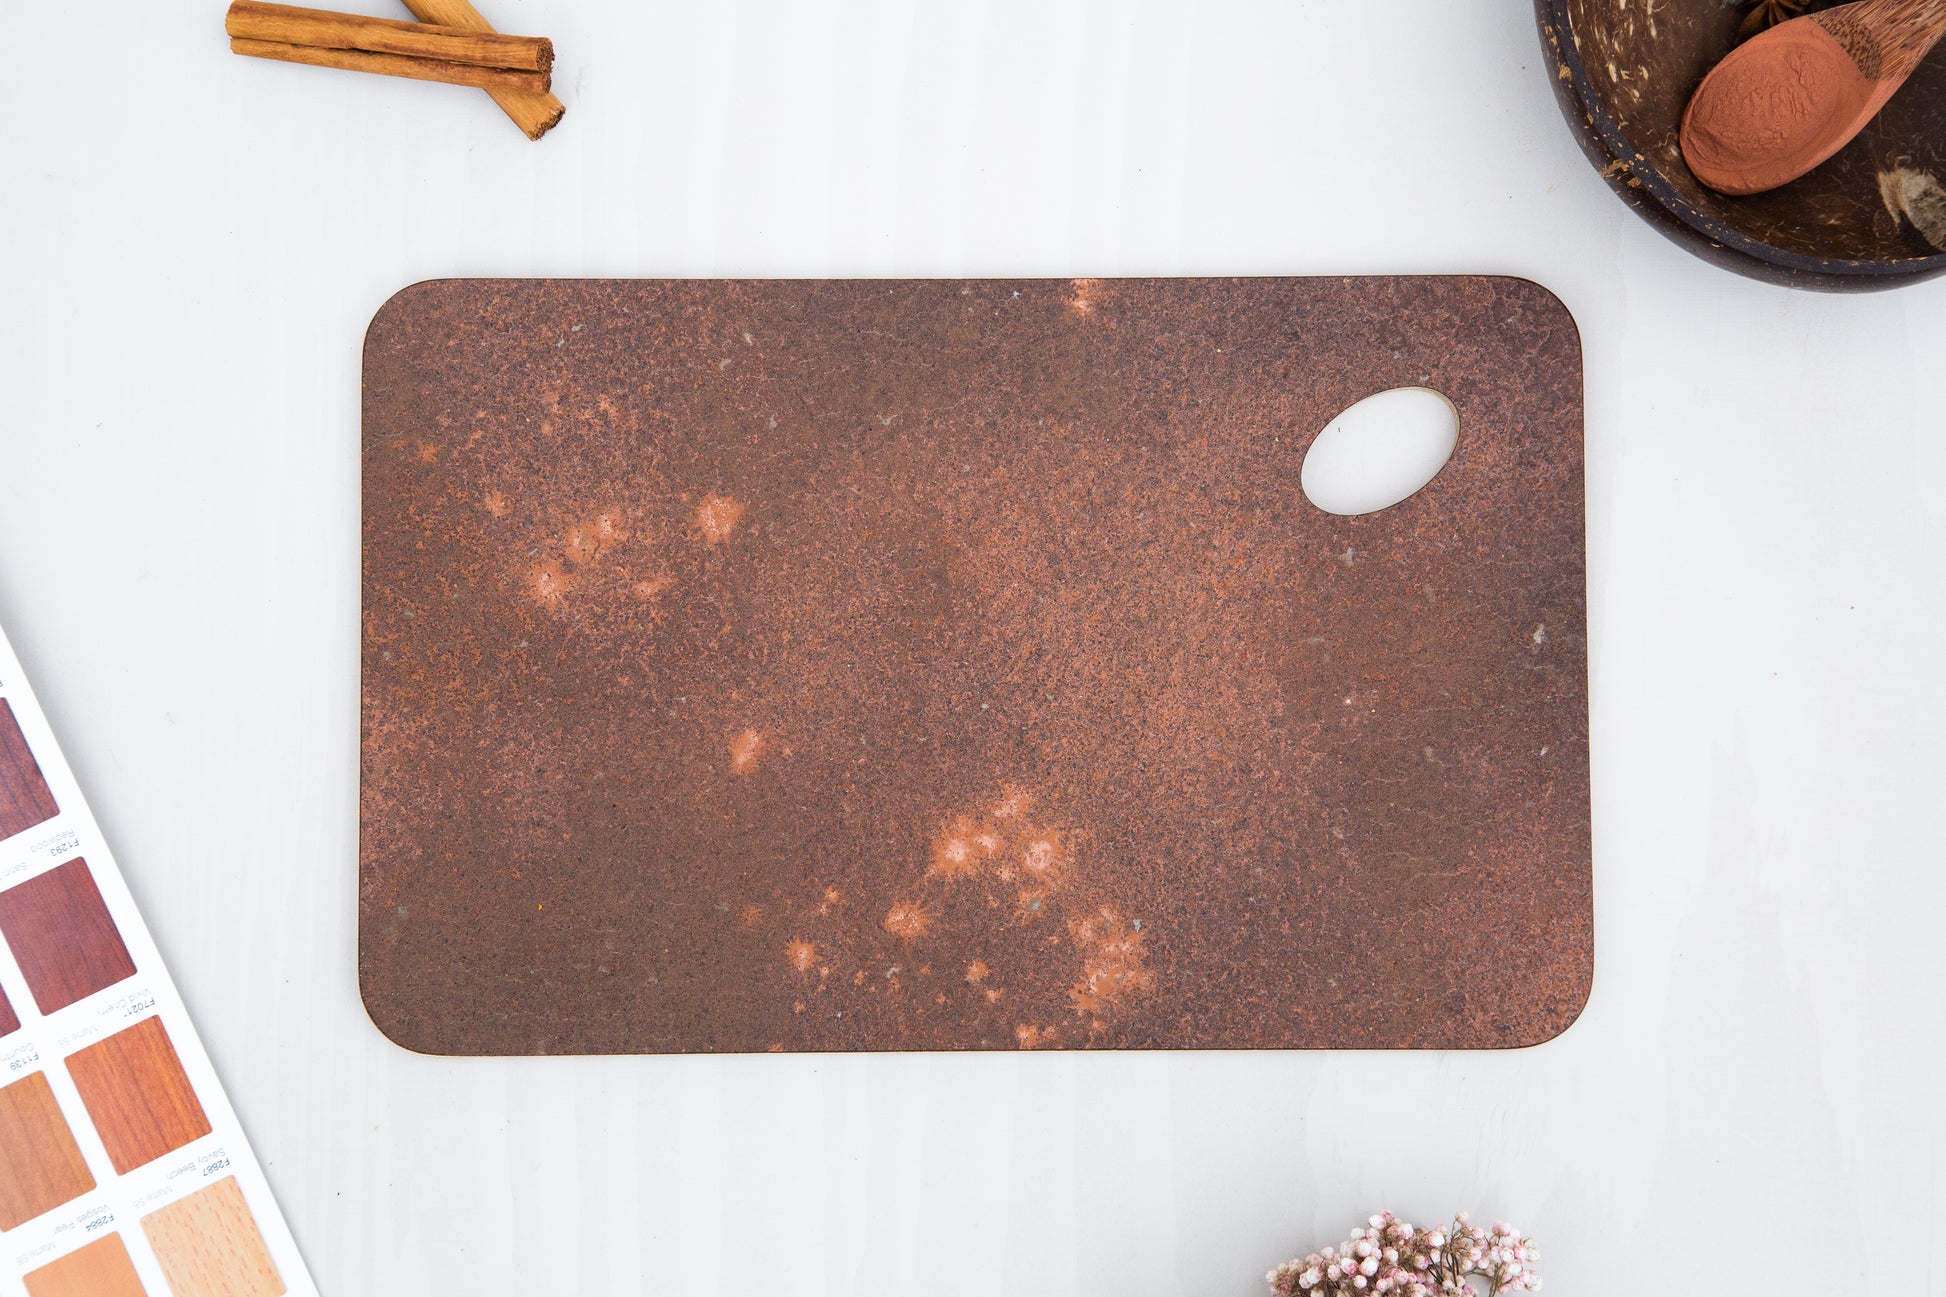 A close up of a KAVA tray, made by pressing coffee waste and copper into birch plywood. The corners are rounded at a soft radius and one corner is an oval shaped hole so you can hold the tray with your thumb, or hang it on a hook.